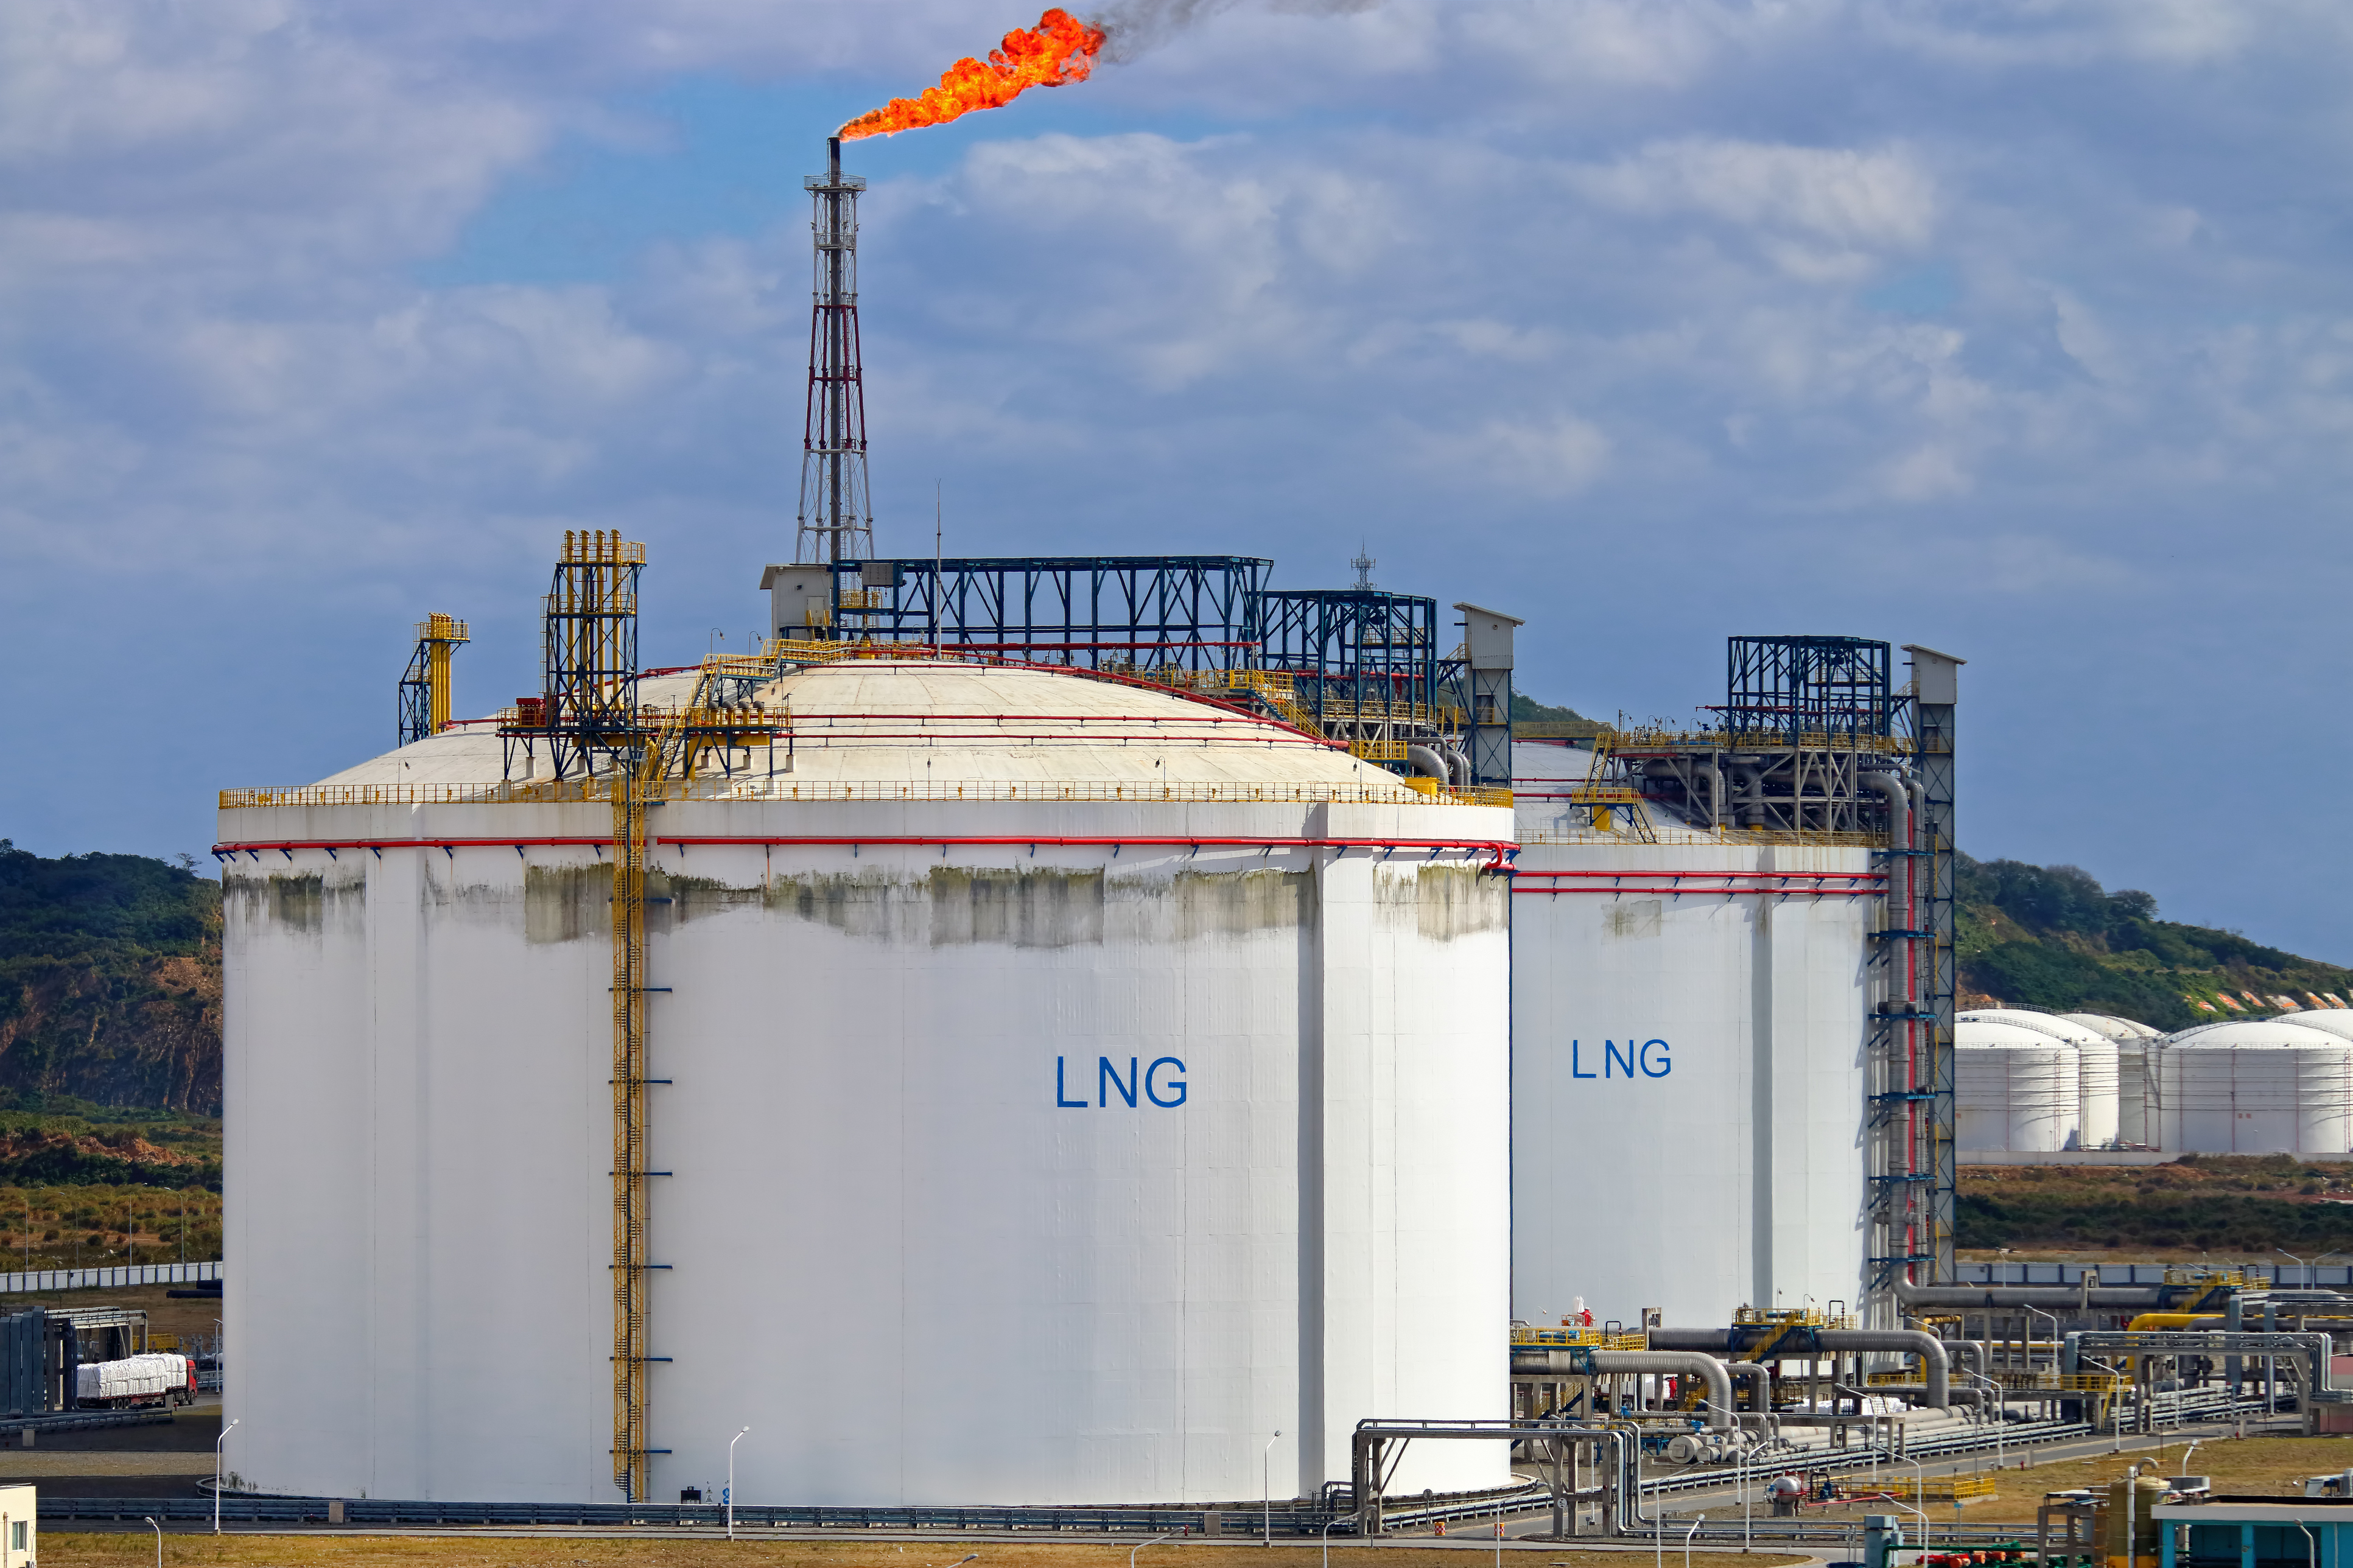 Oil and Gas storage tanks